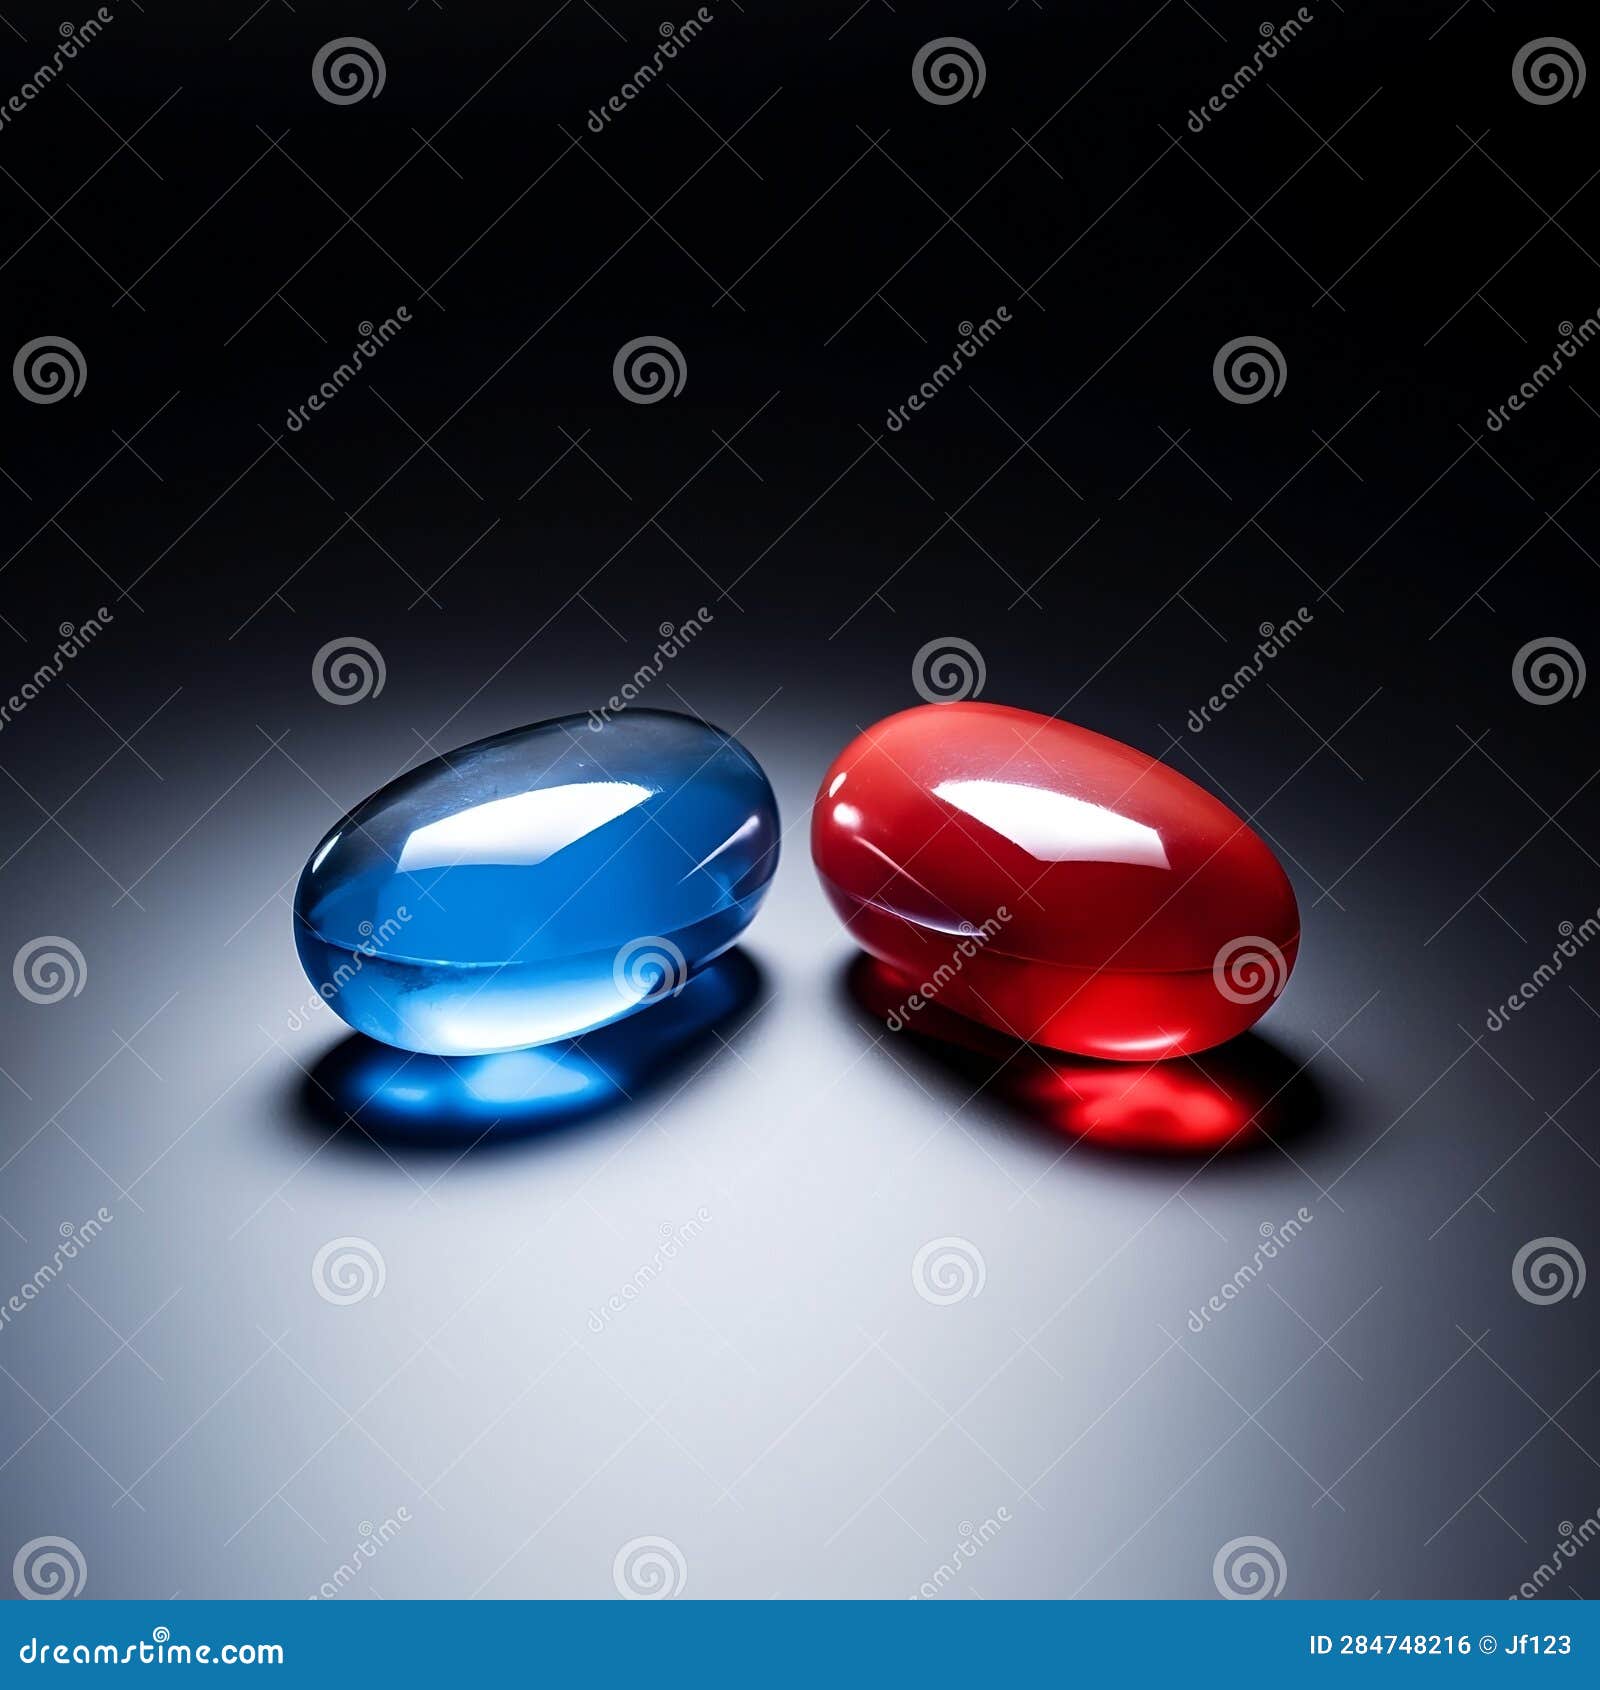 Intriguing And Enigmatic The Red Pill Blue Pill Concept Presents A